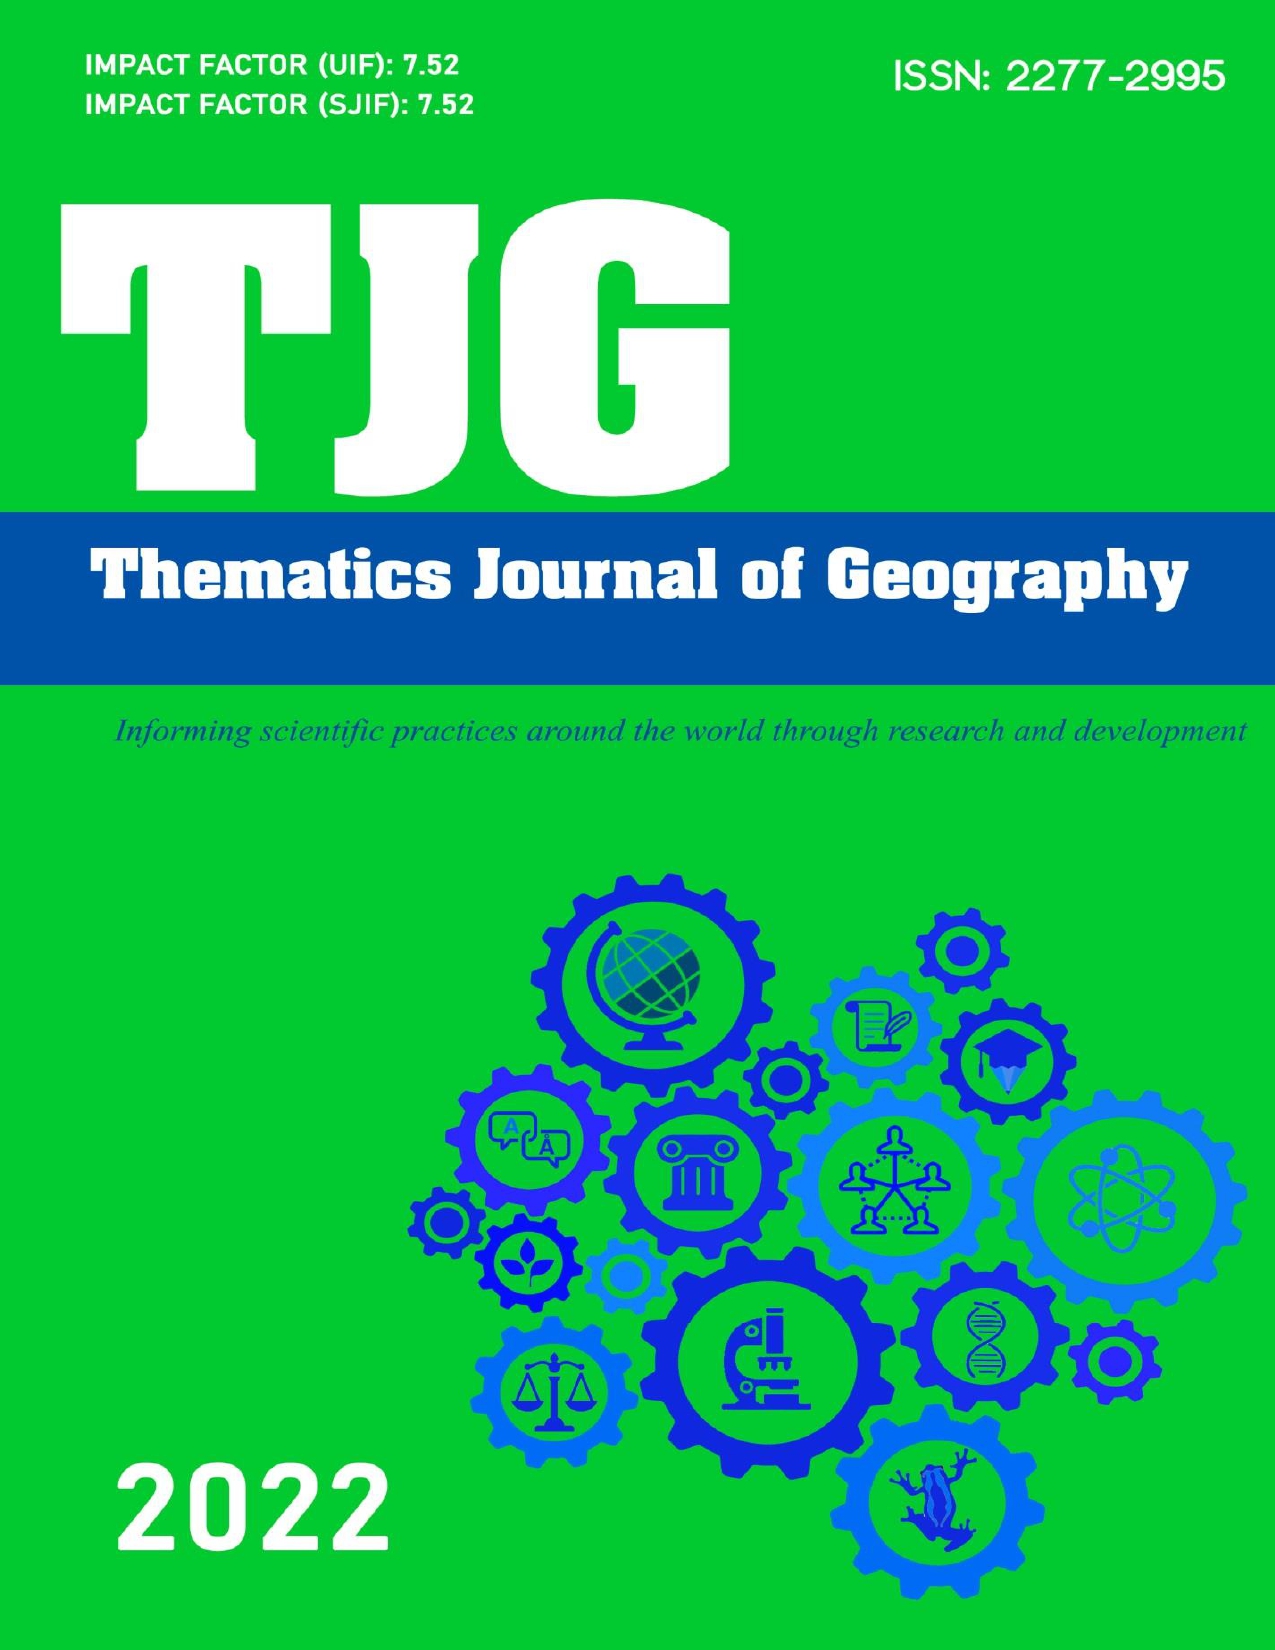 					View Vol. 5 No. 1 (2022): THEMATICS JOURNAL OF GEOGRAPHY
				